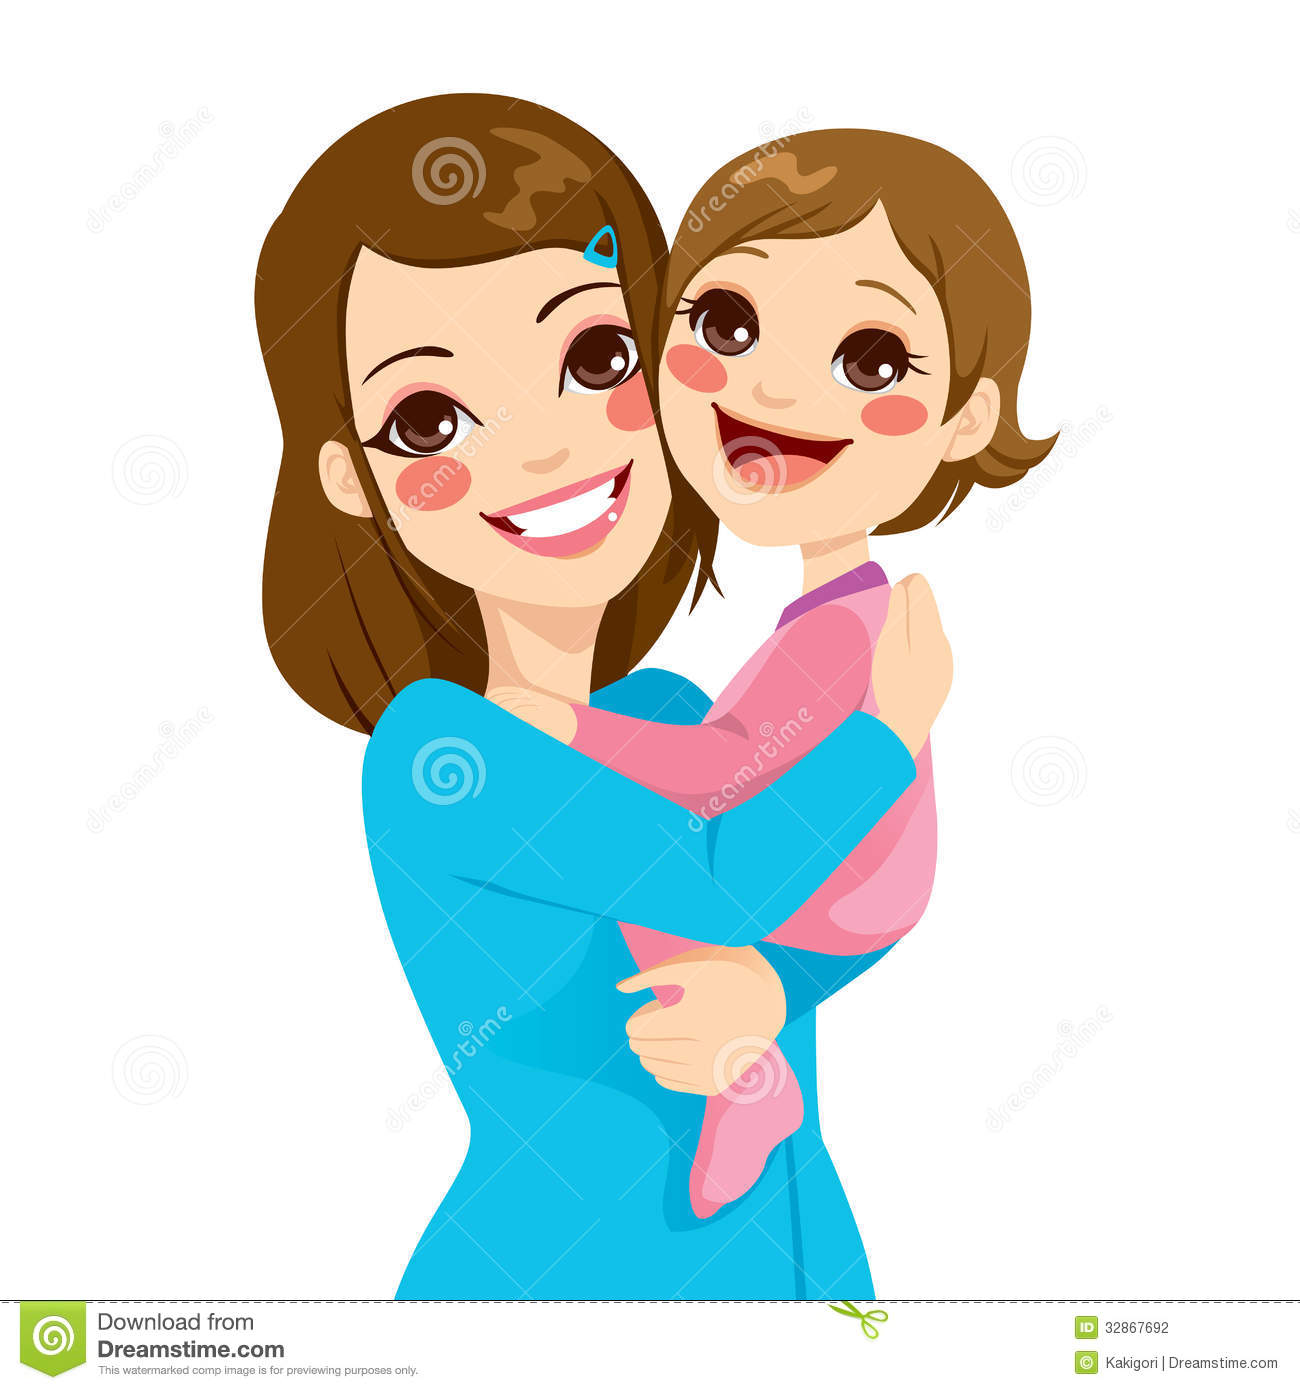 Mother Daughter Clipart at GetDrawings.com.